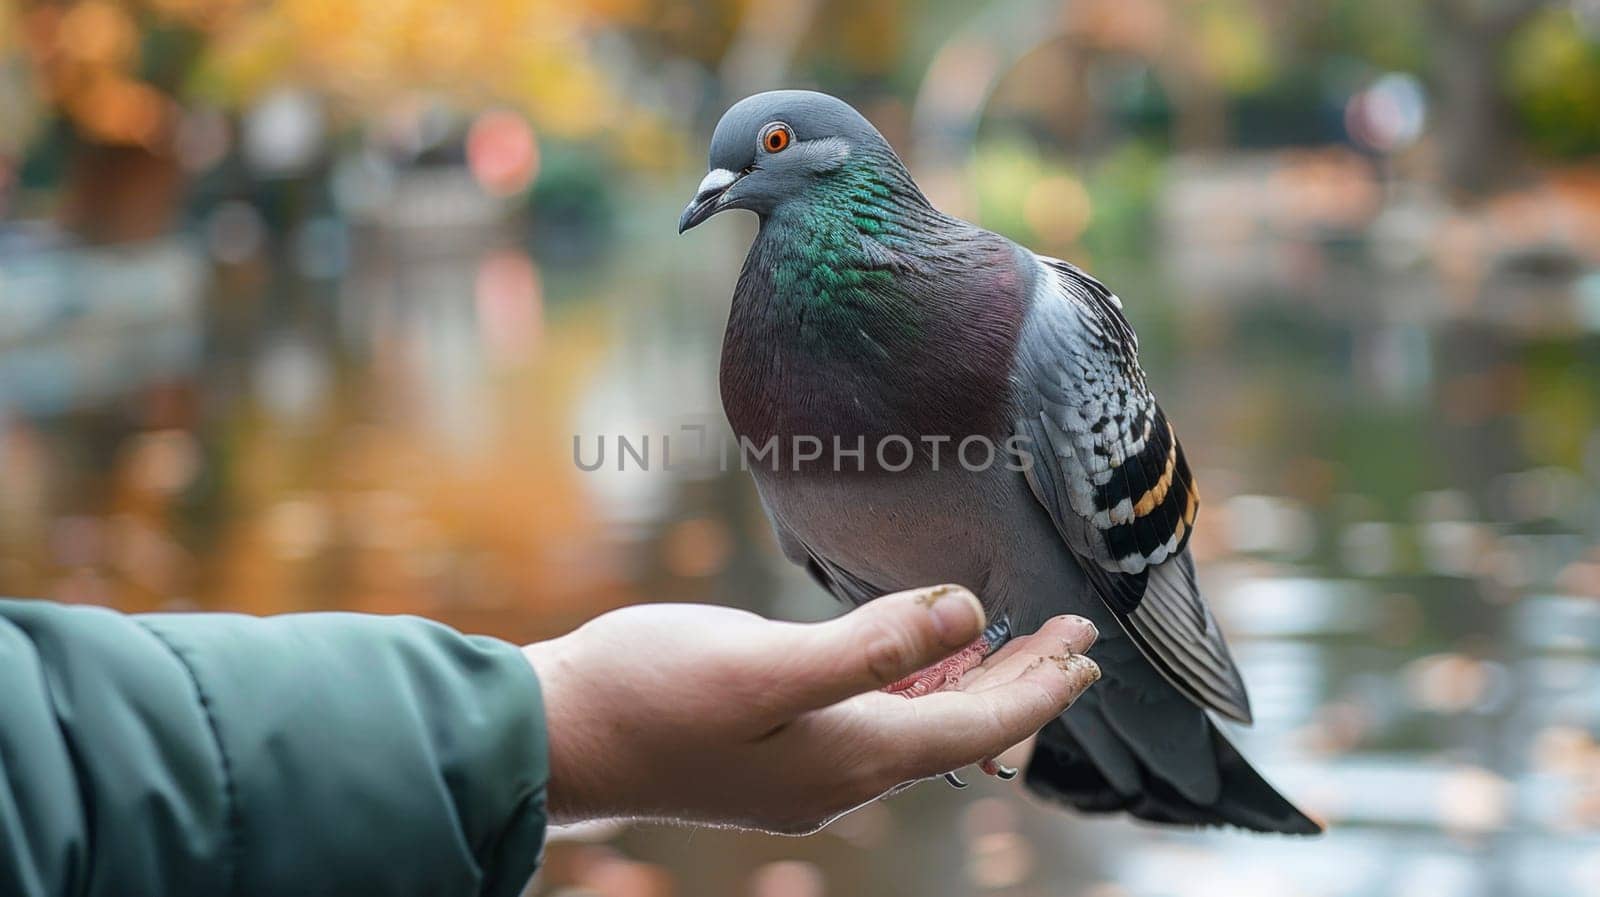 A person holding a bird in their hand by the water, AI by starush